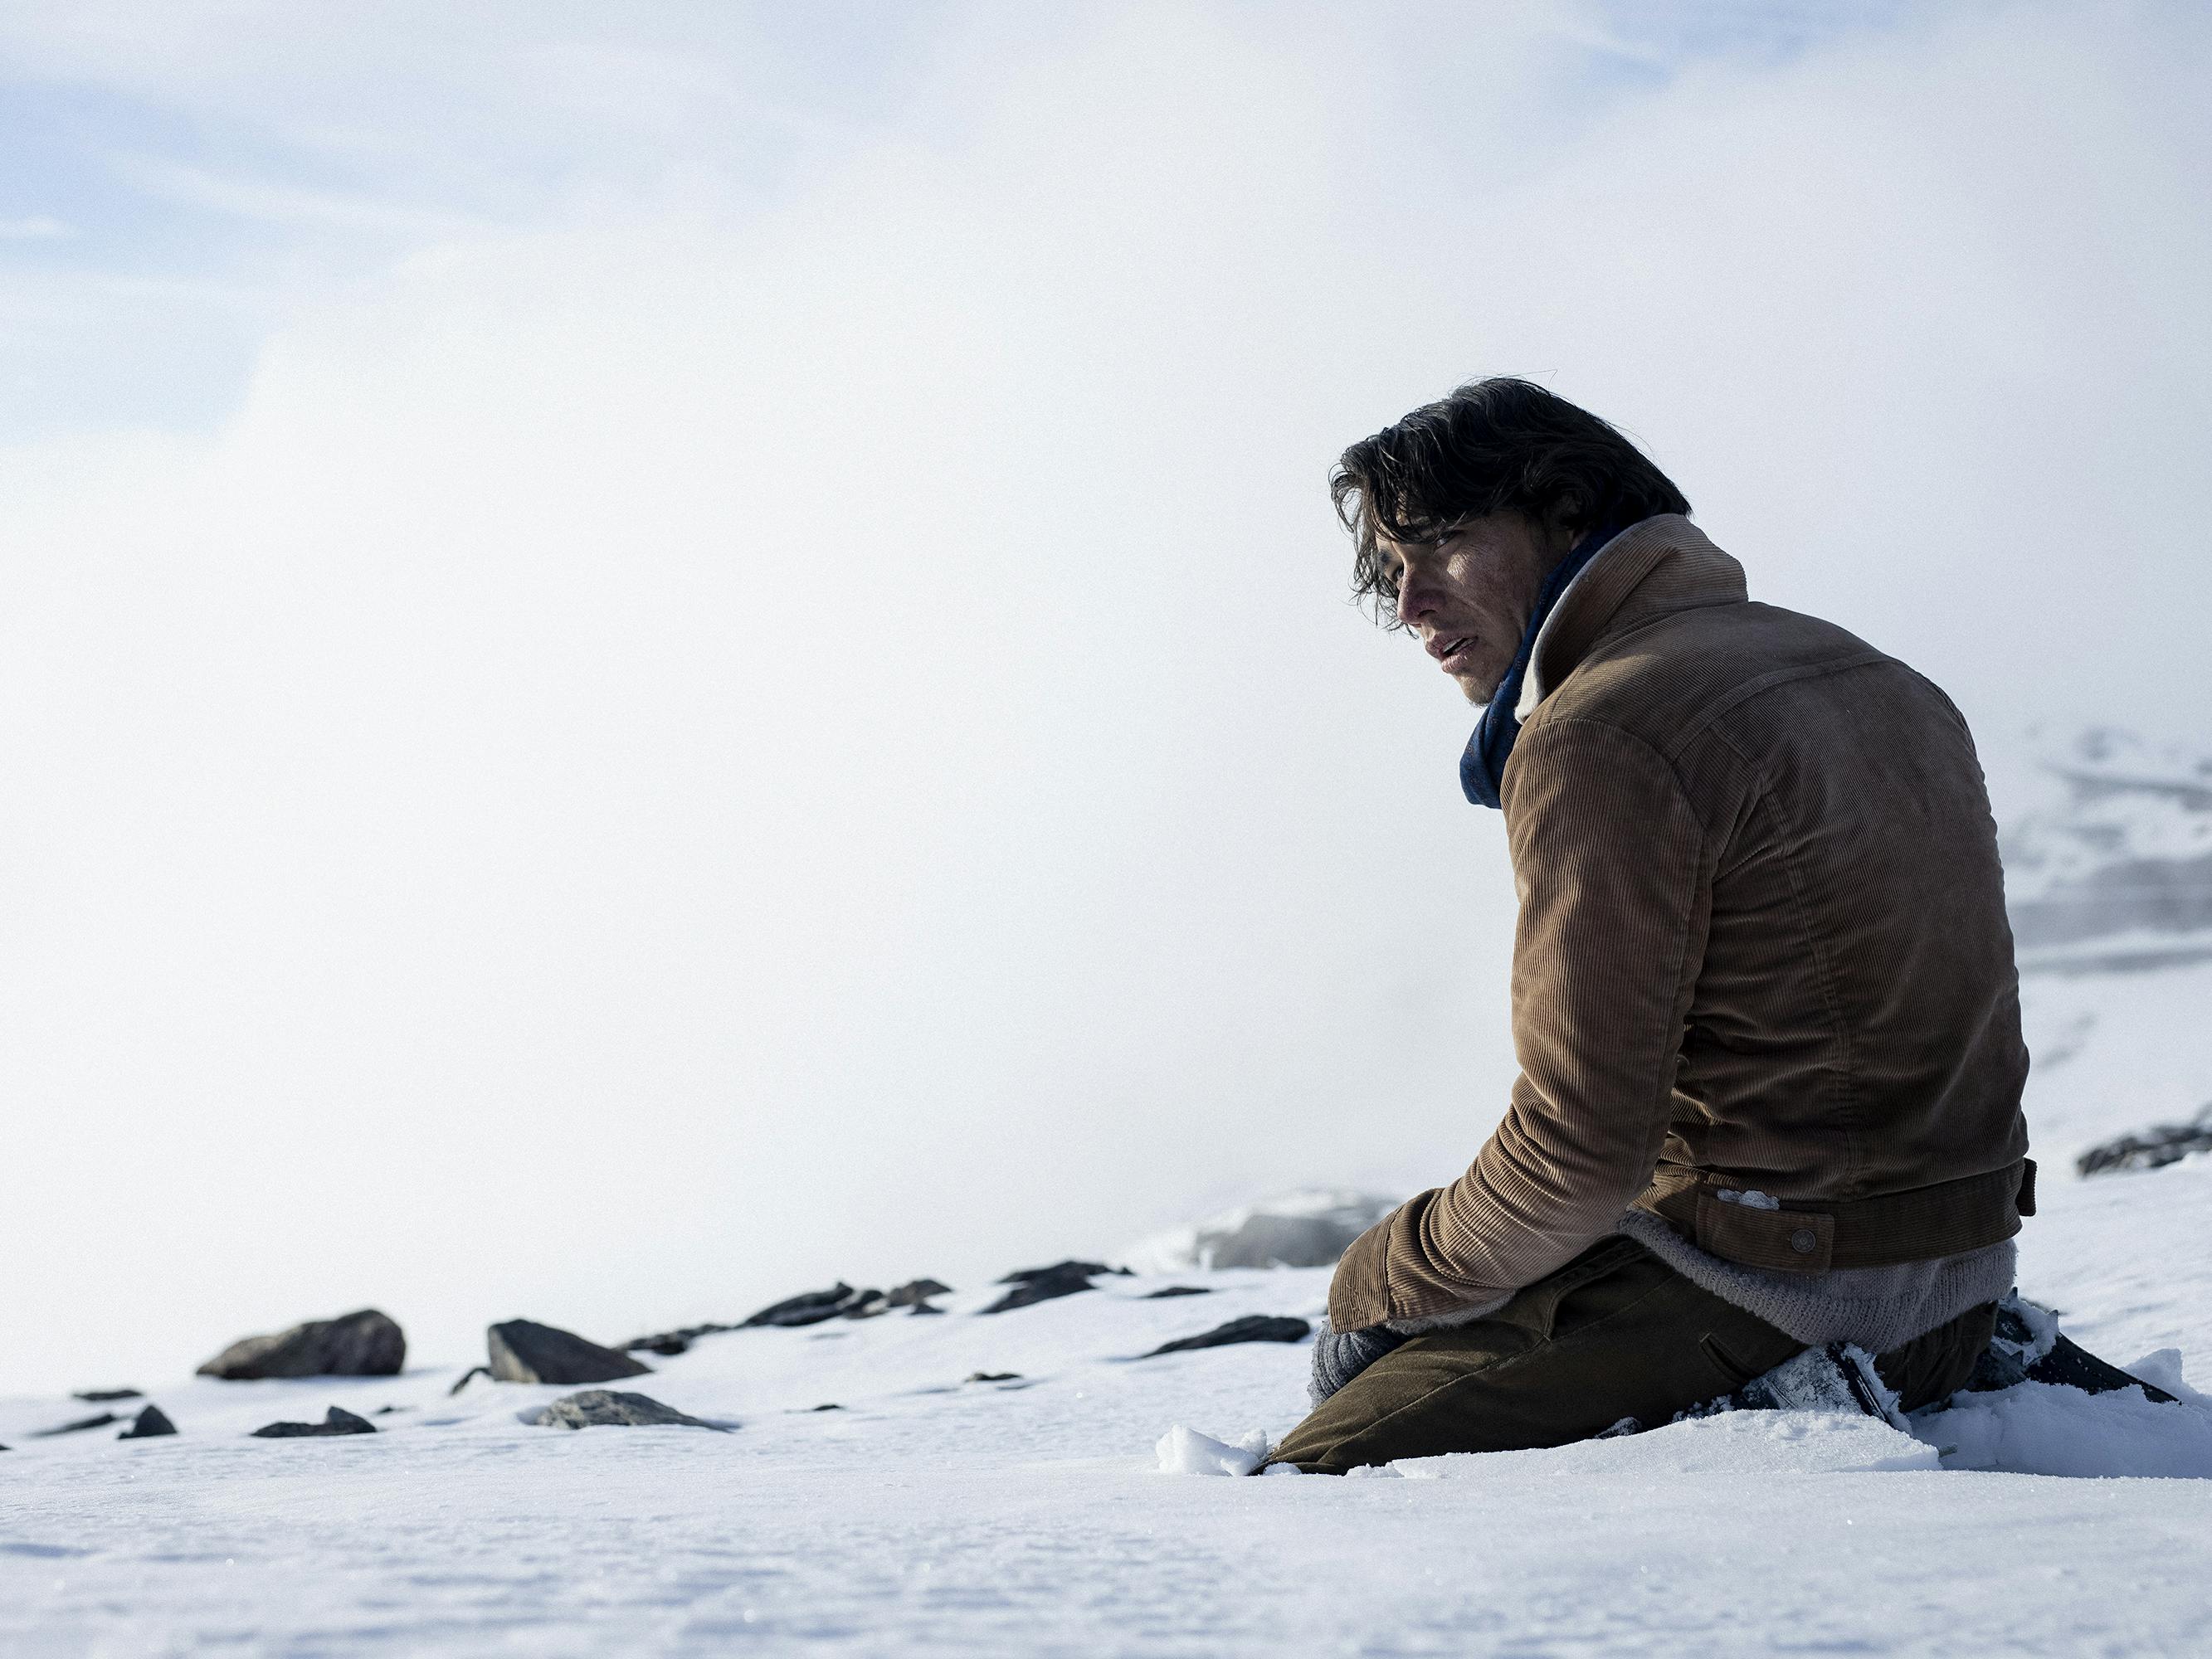 Numa (Enzo Vogrincic) wears a brown jacket and kneels in the snow.